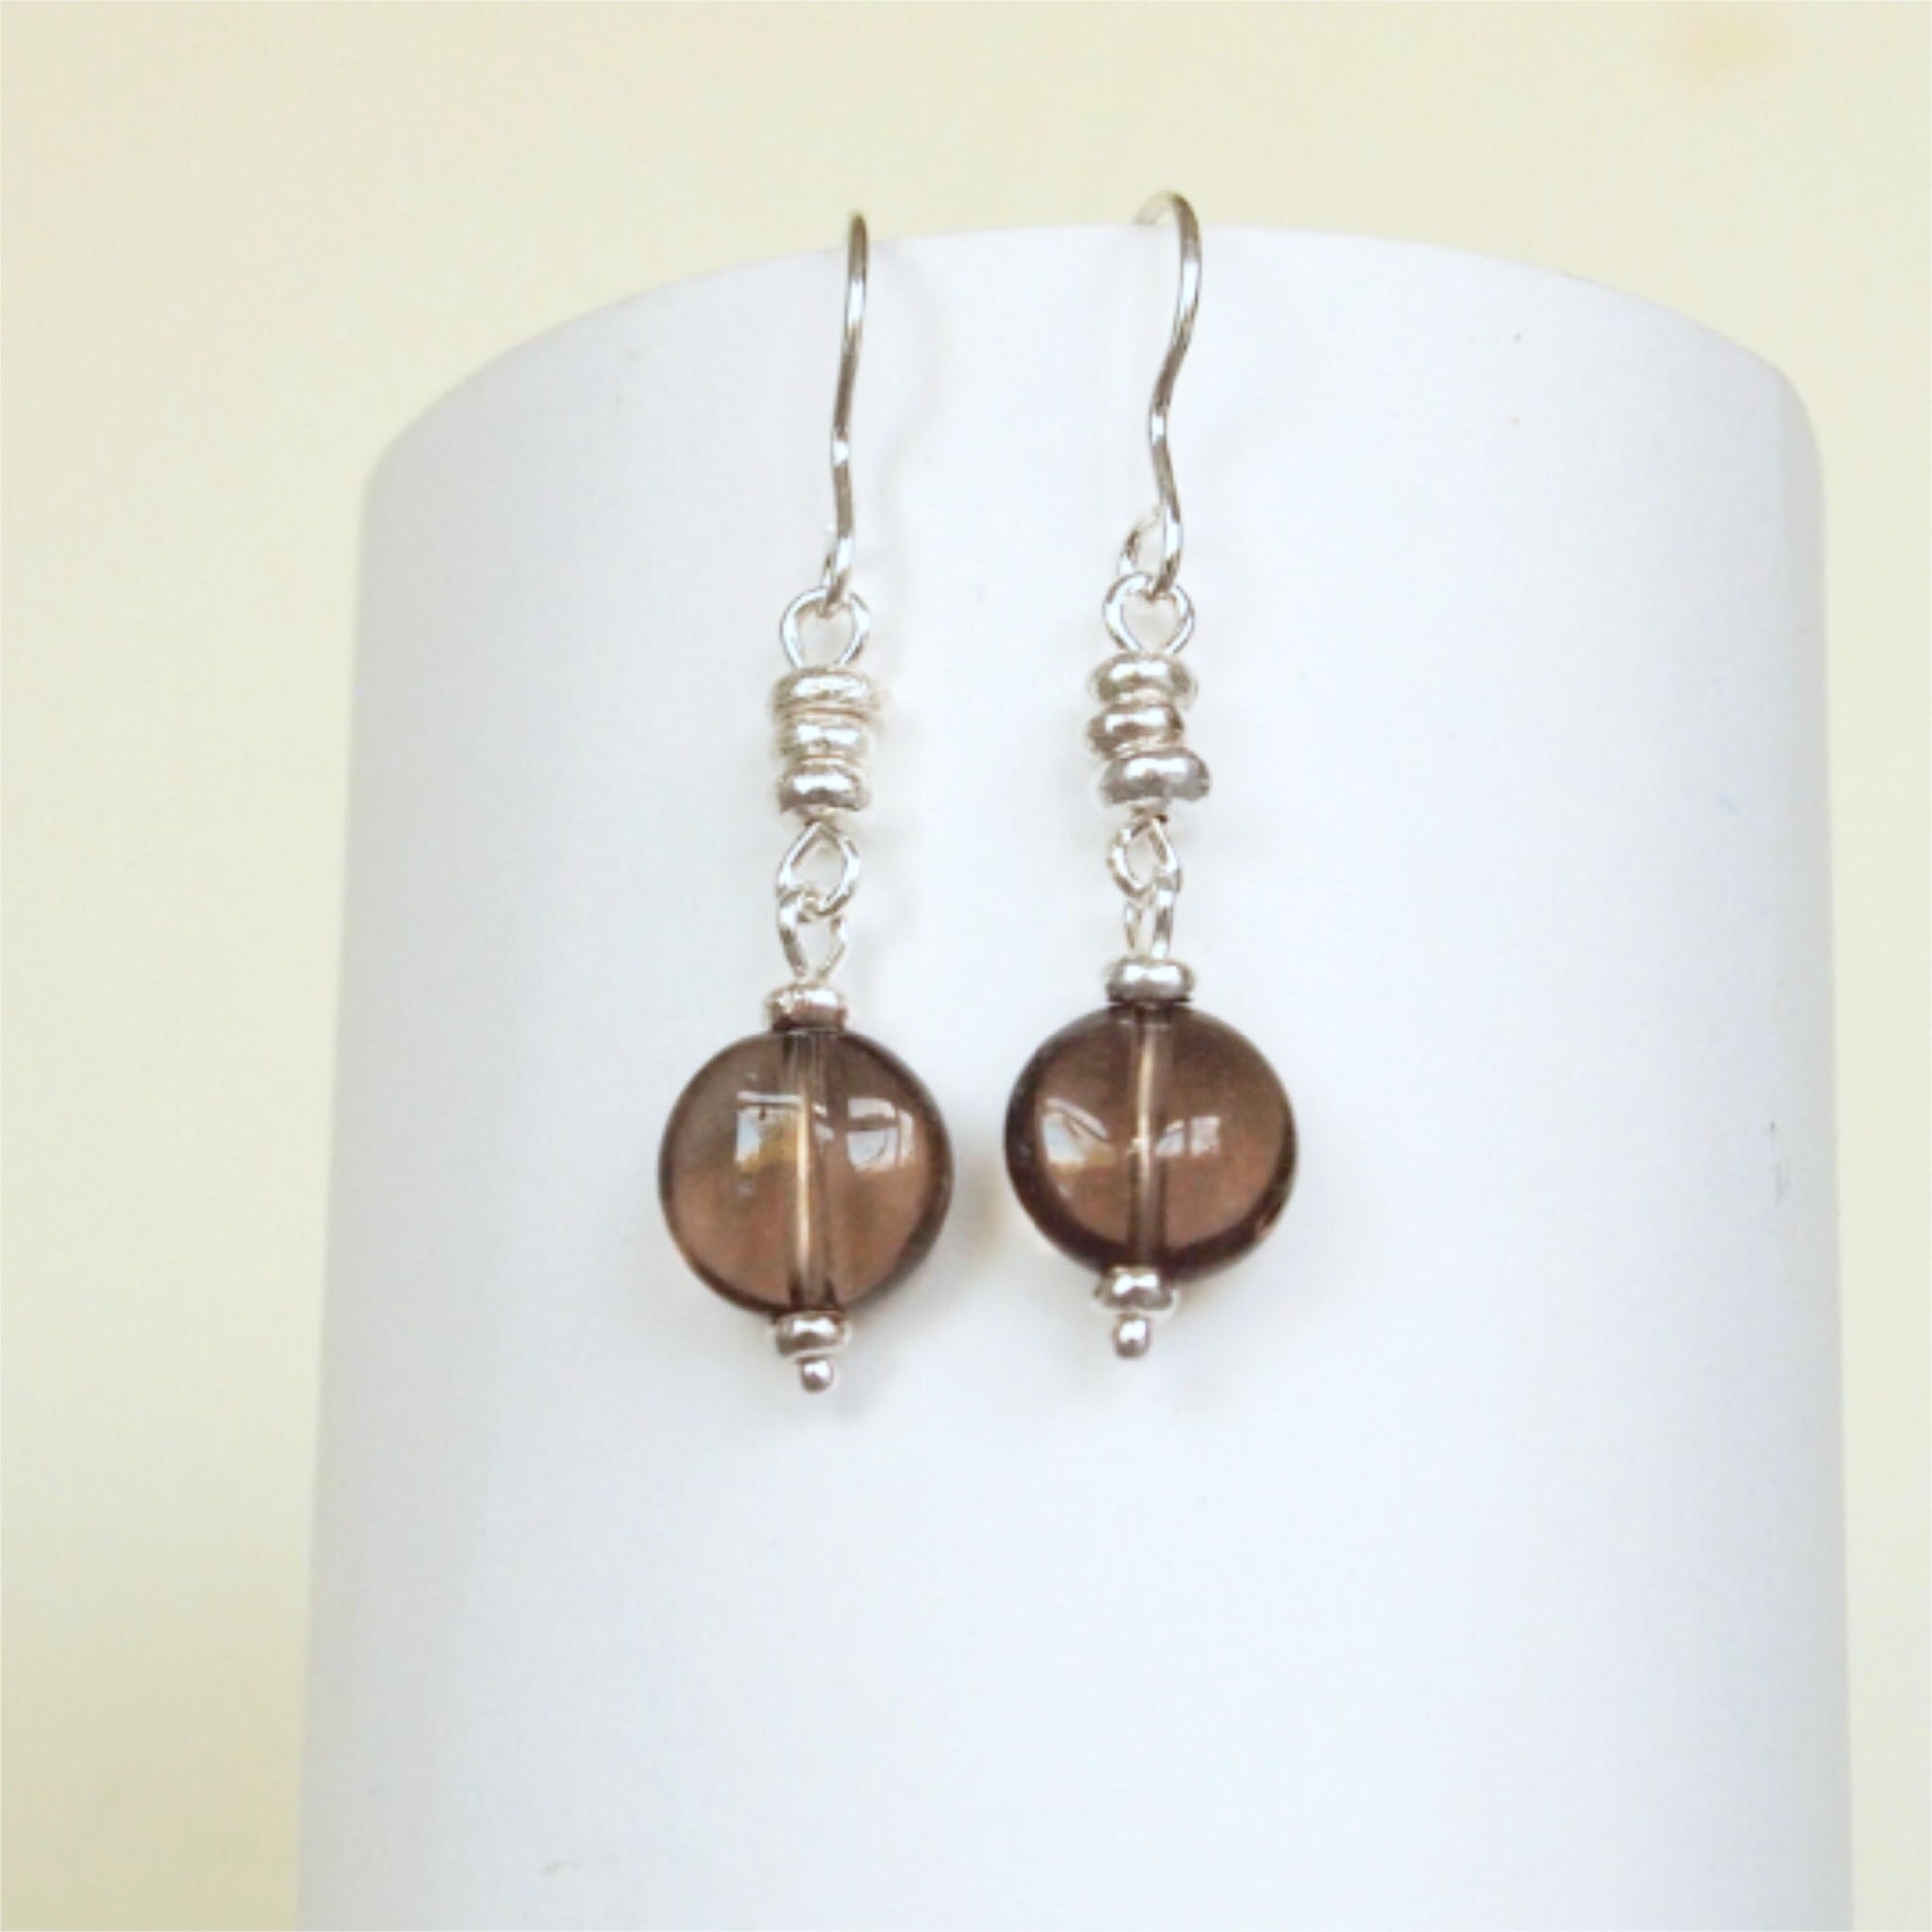 Smoky Quartz and Sterling Silver dropper earrings. made from recycled silver beads and a 1cm round smoky quartz drop. Made in Scotland by maram jewellery